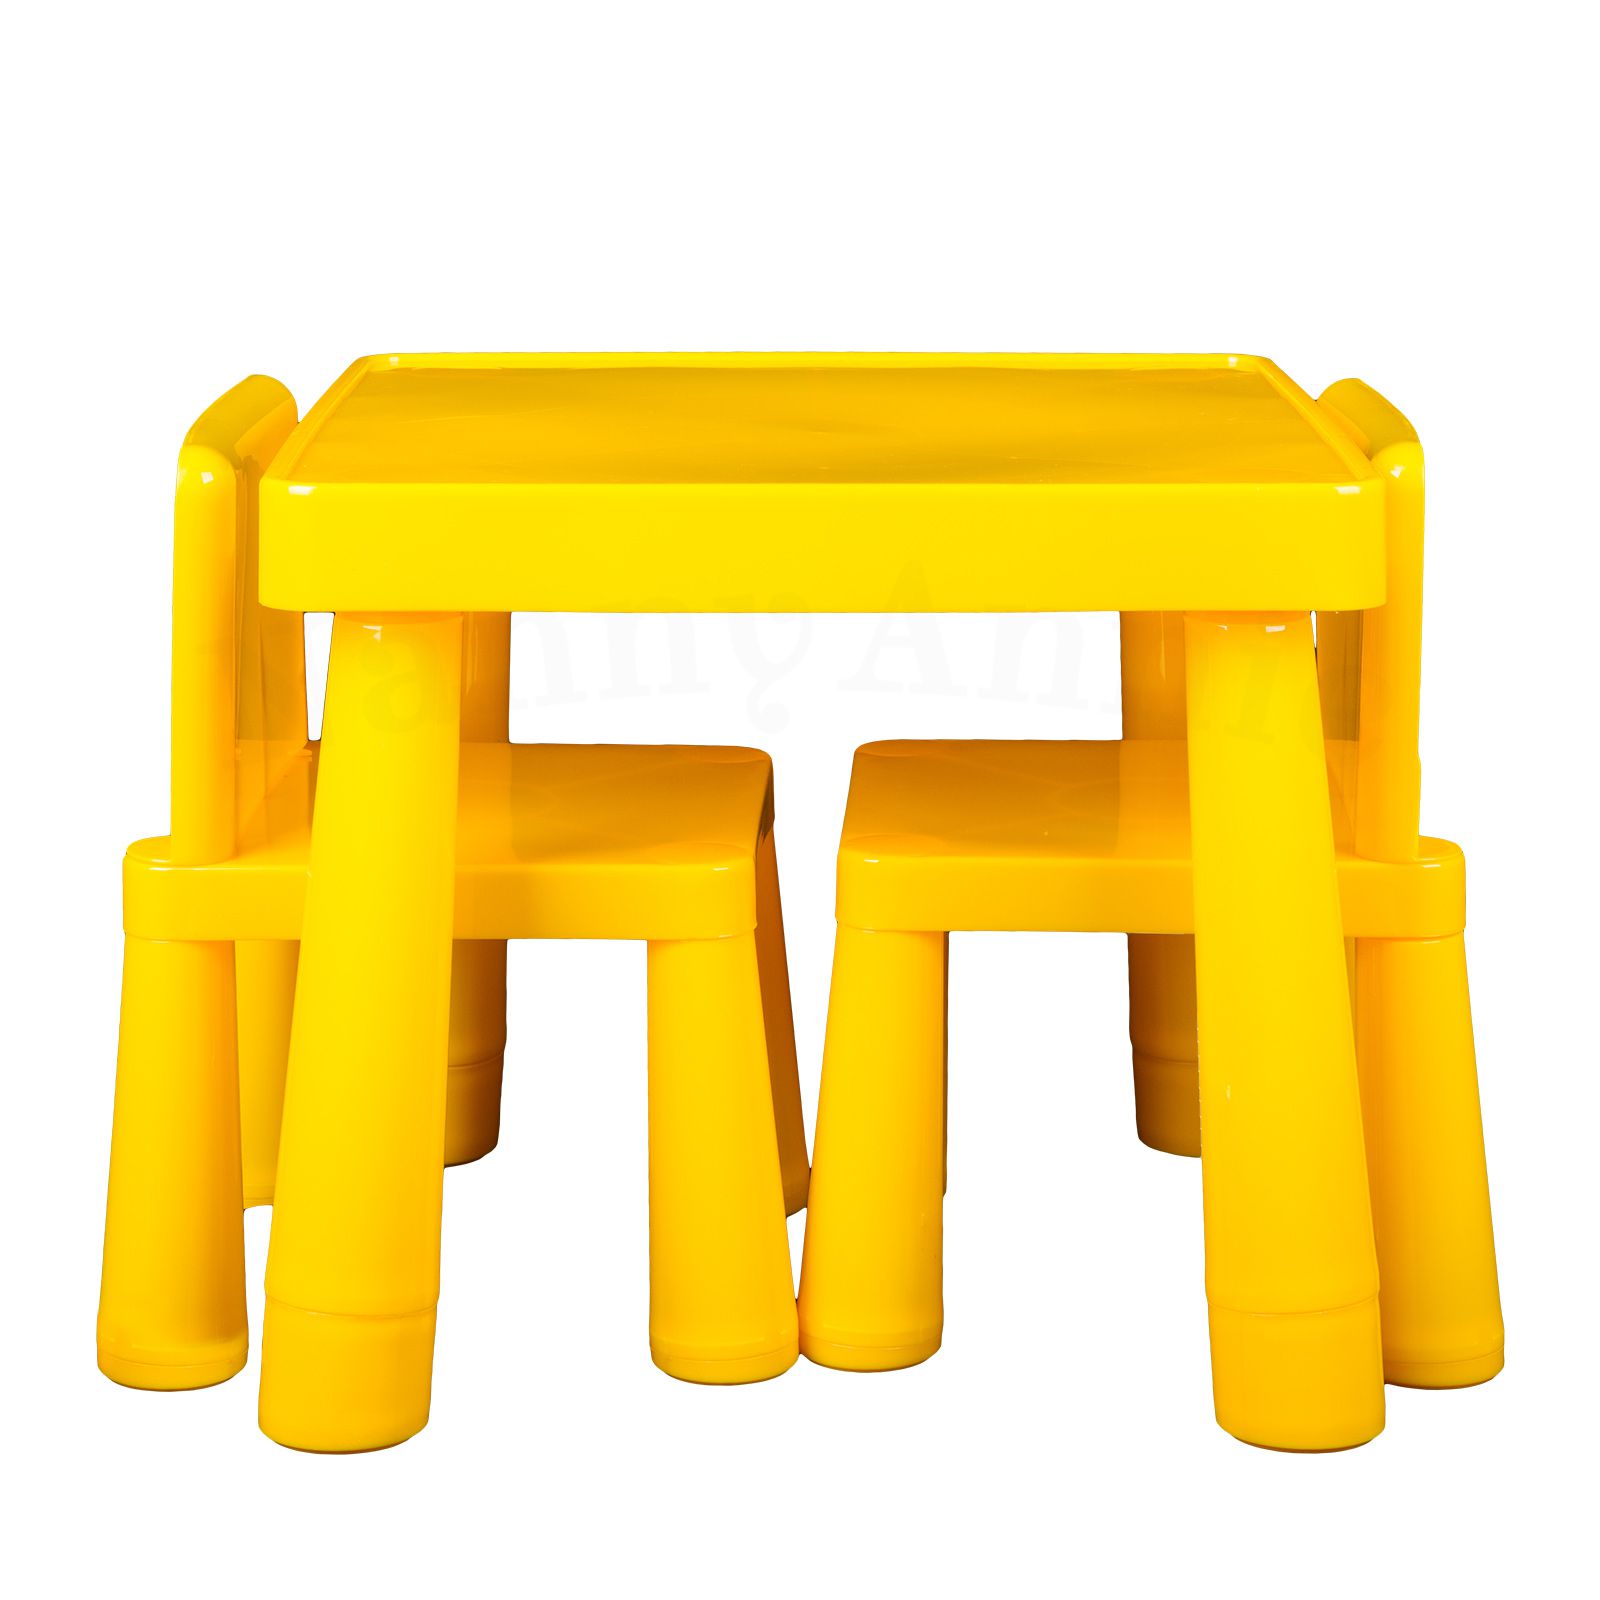 Kids Table & Chair Play Furniture Set Plastic Fountain Activity Dining Chairs YELLOW